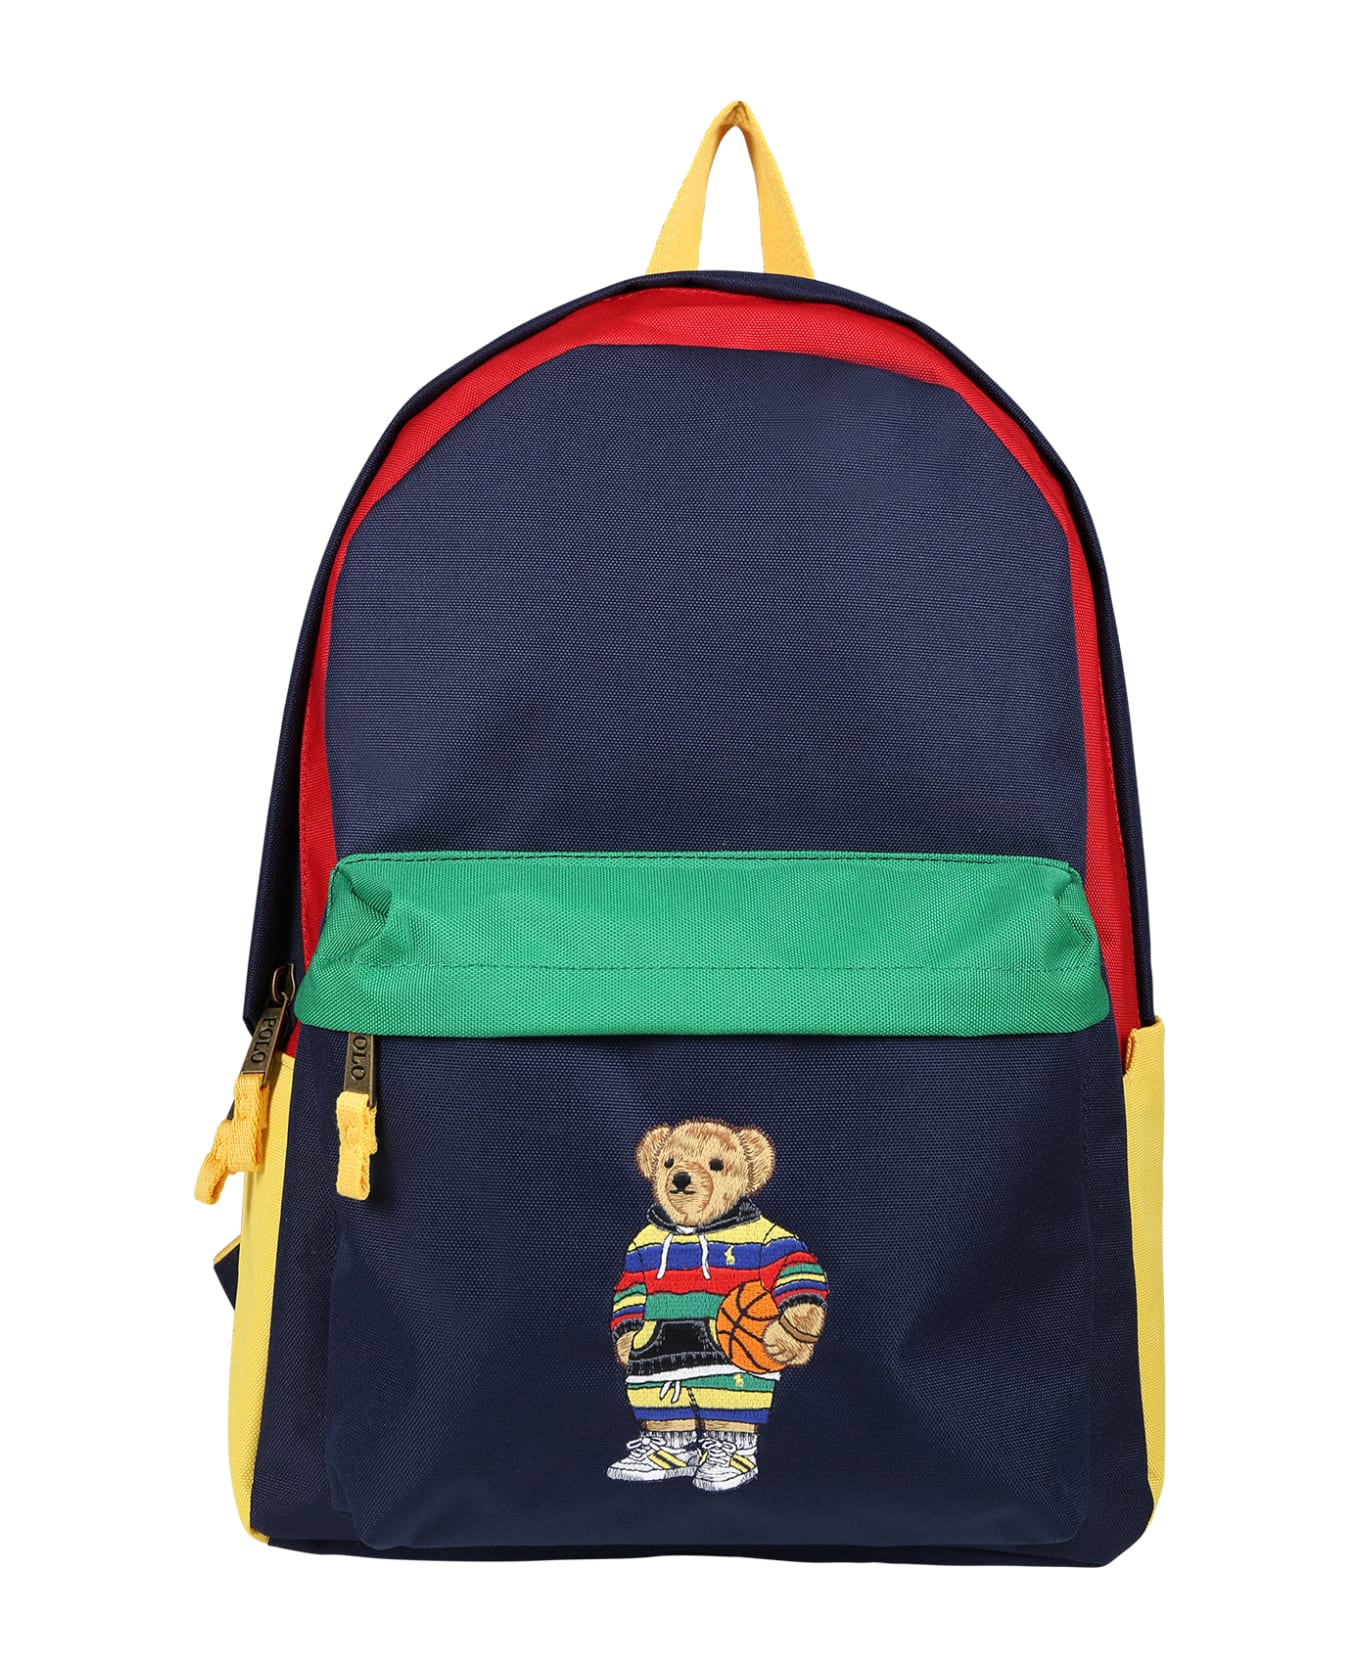 Ralph Lauren Colorblock Backpack With Bear For Kids - Multicolor